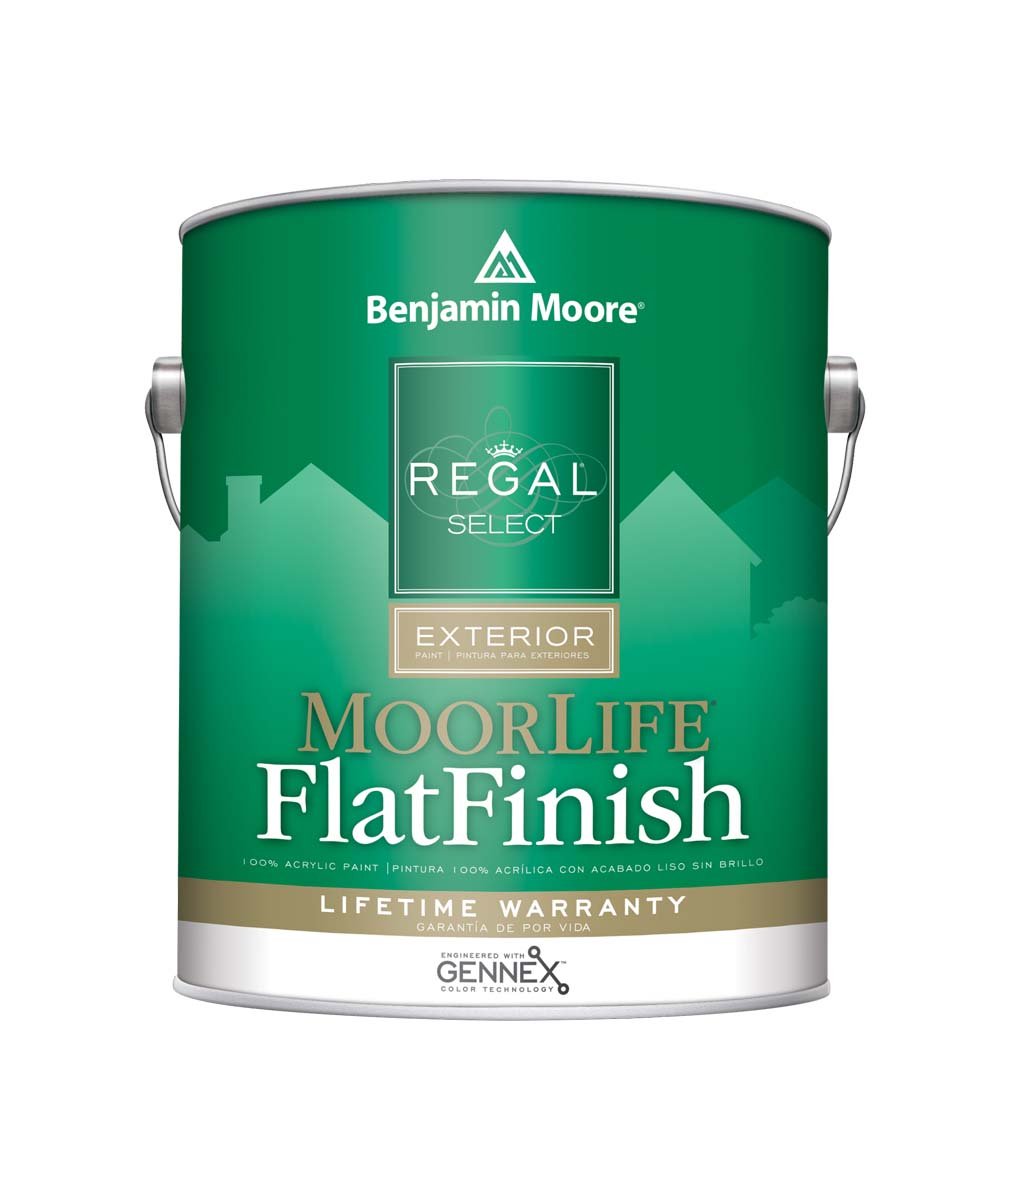 Ricciardi Brothers | Your Local Benjamin Moore Paint Store | 38 W Skippack Pike, Blue Bell, PA 19422 | Phone: (215) 643-1260